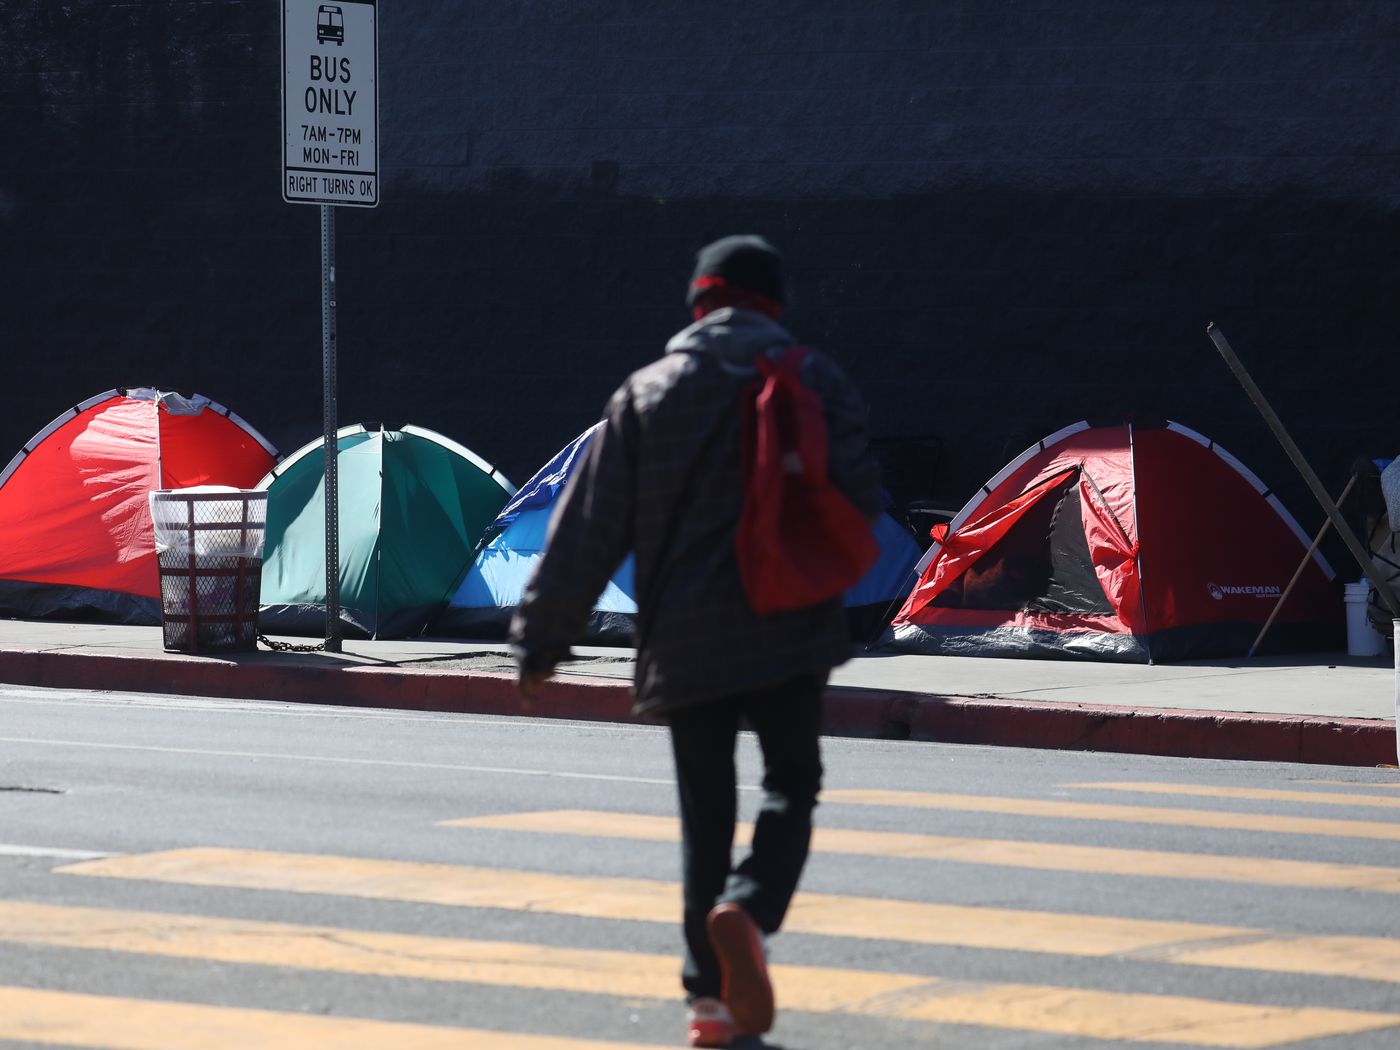 The federal court decision affecting homeless tent encampments in America